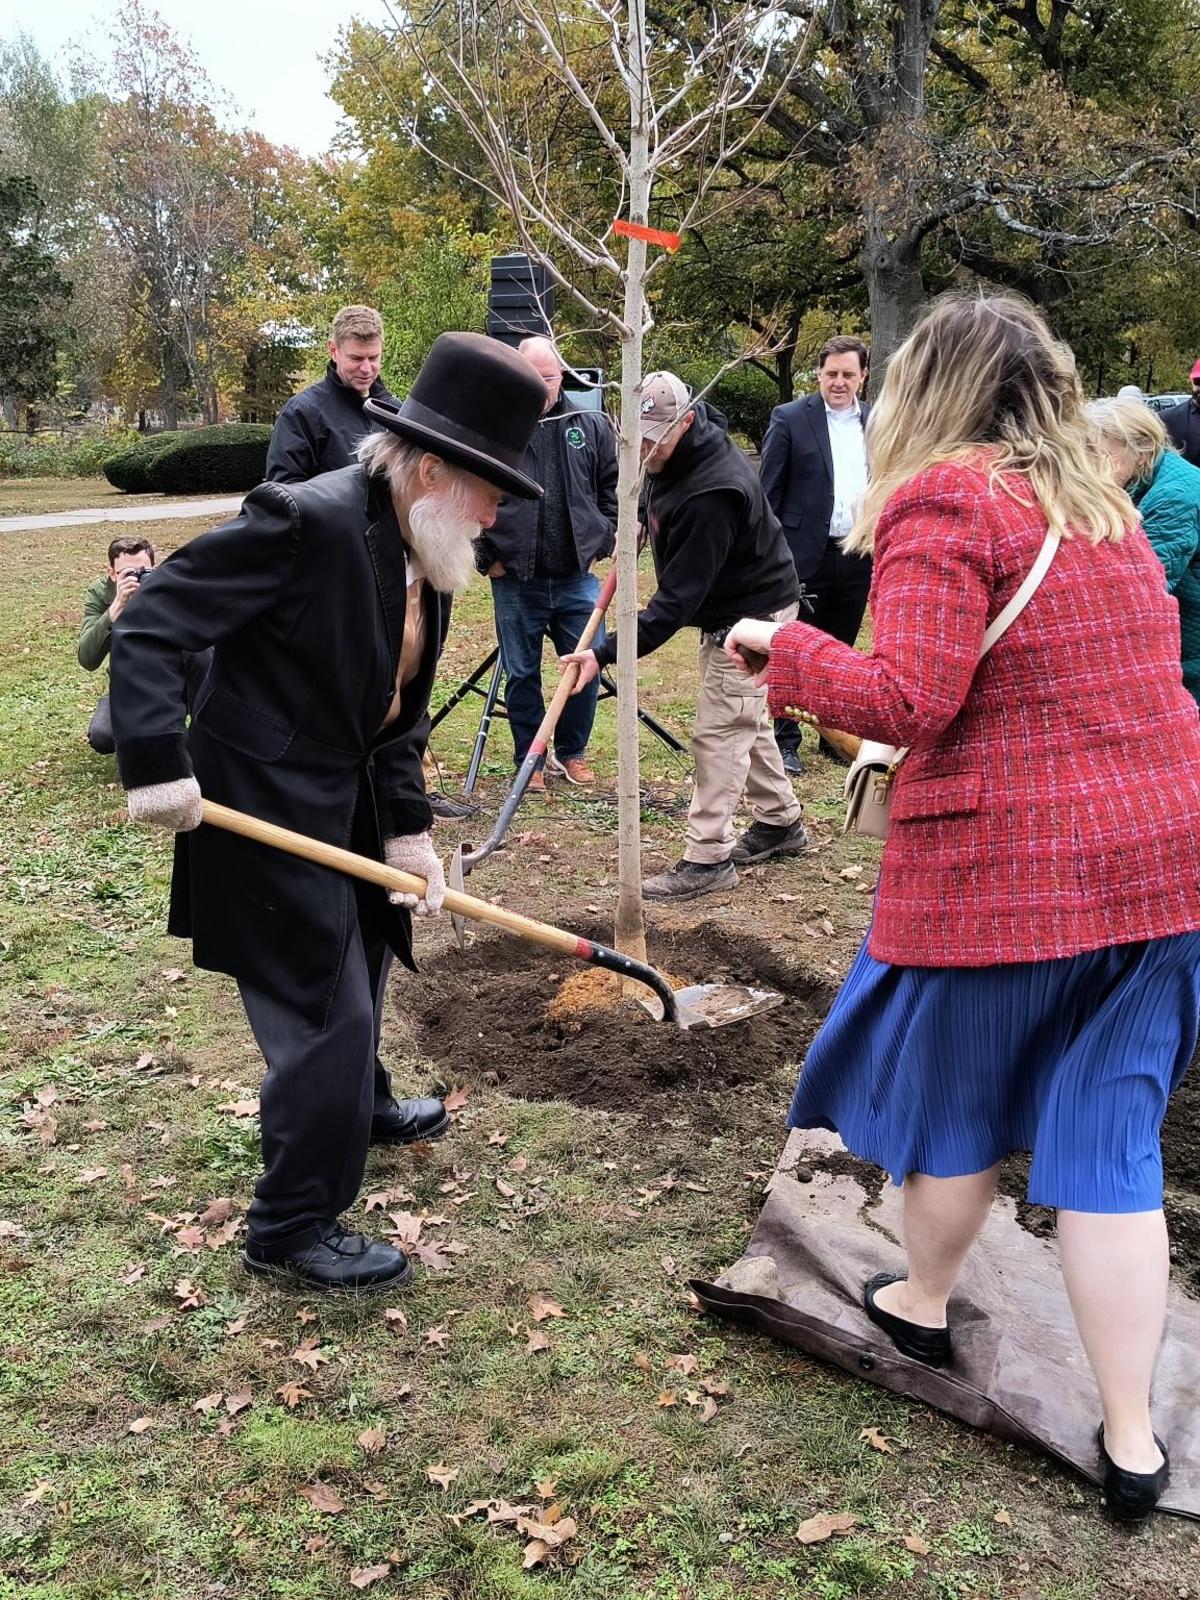 A local personality dressed to embody Frederick Law Olmstead shovels dirt onto the newly planted tree with a woman next to him.